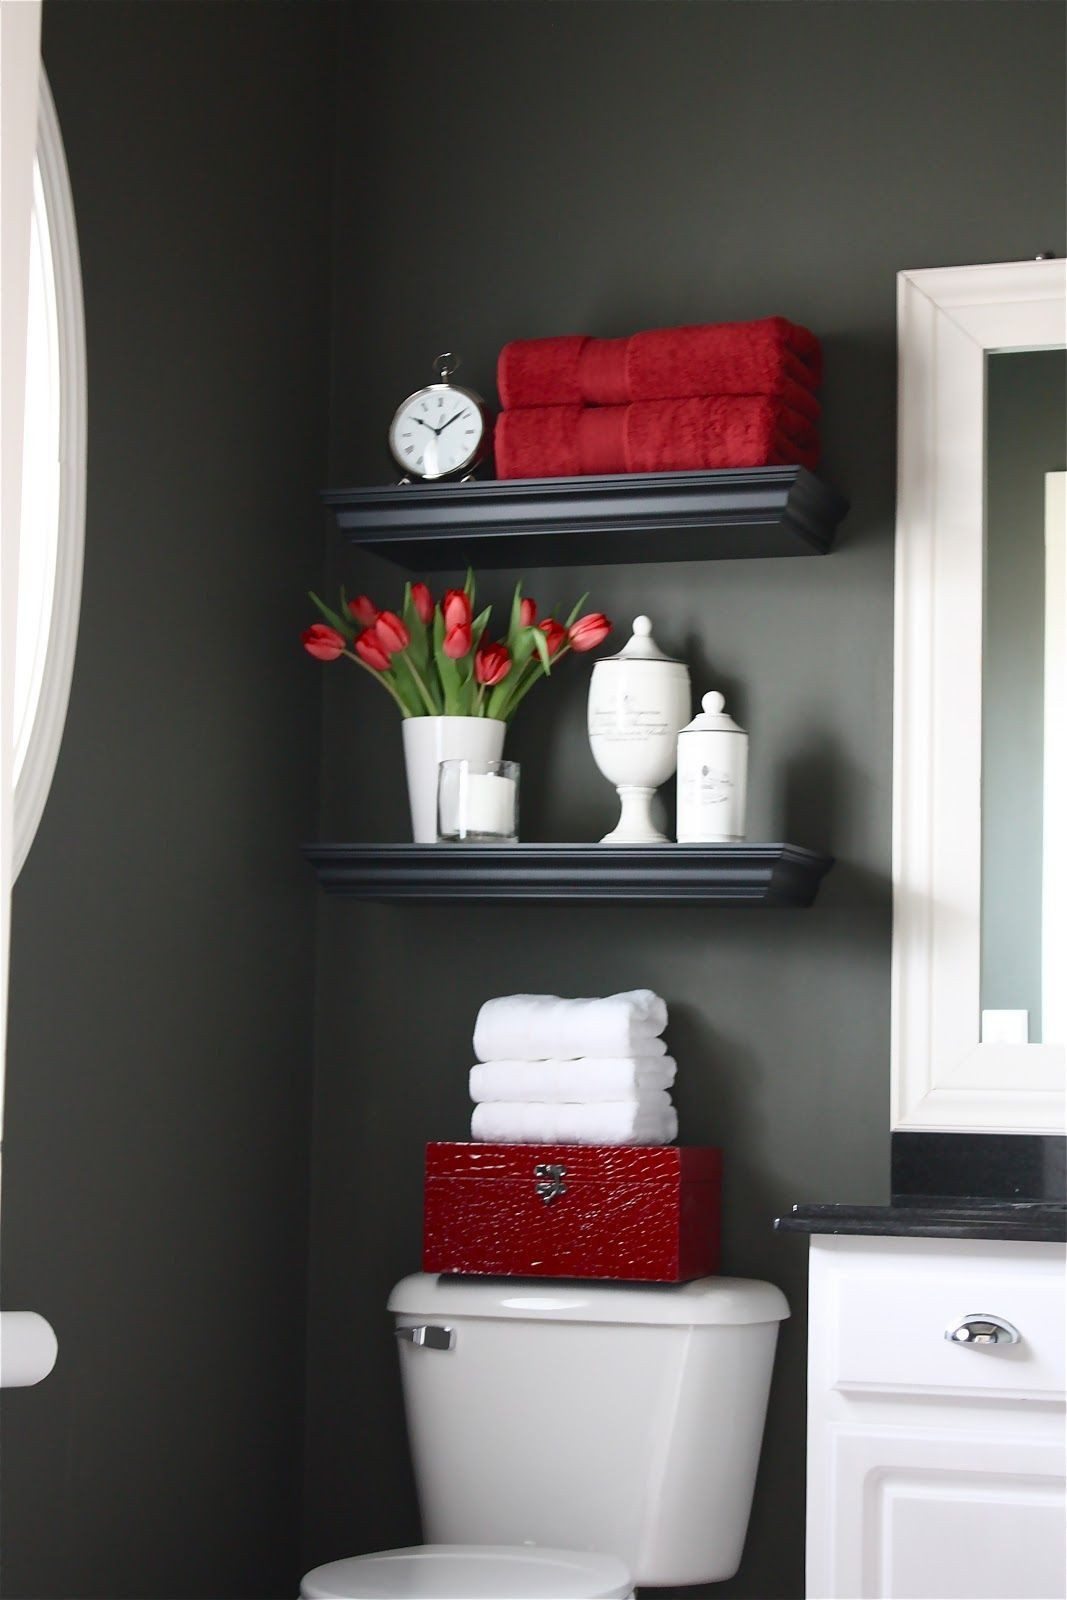 Red And Brown Bathroom Decor
 My Powder Room Makeover Reveal And a Giveaway